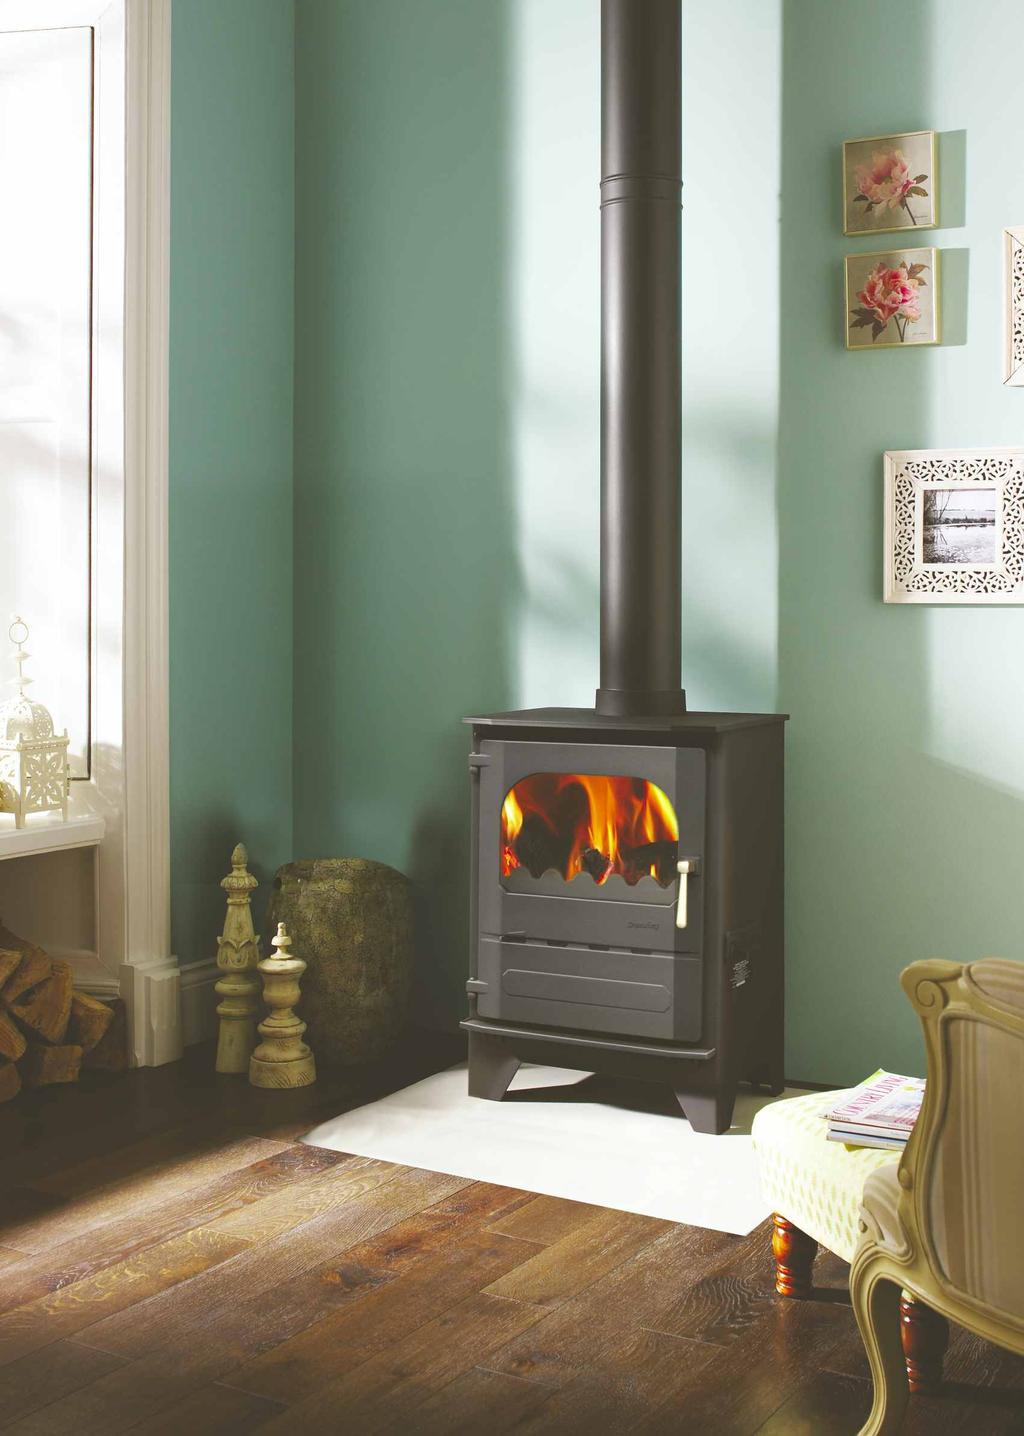 HIGHLNDER 7 ENVIROBURN SOLO CLEN & CLER: Smokeless Multifuel Enviroburn clean combustion with tertiary and airwash